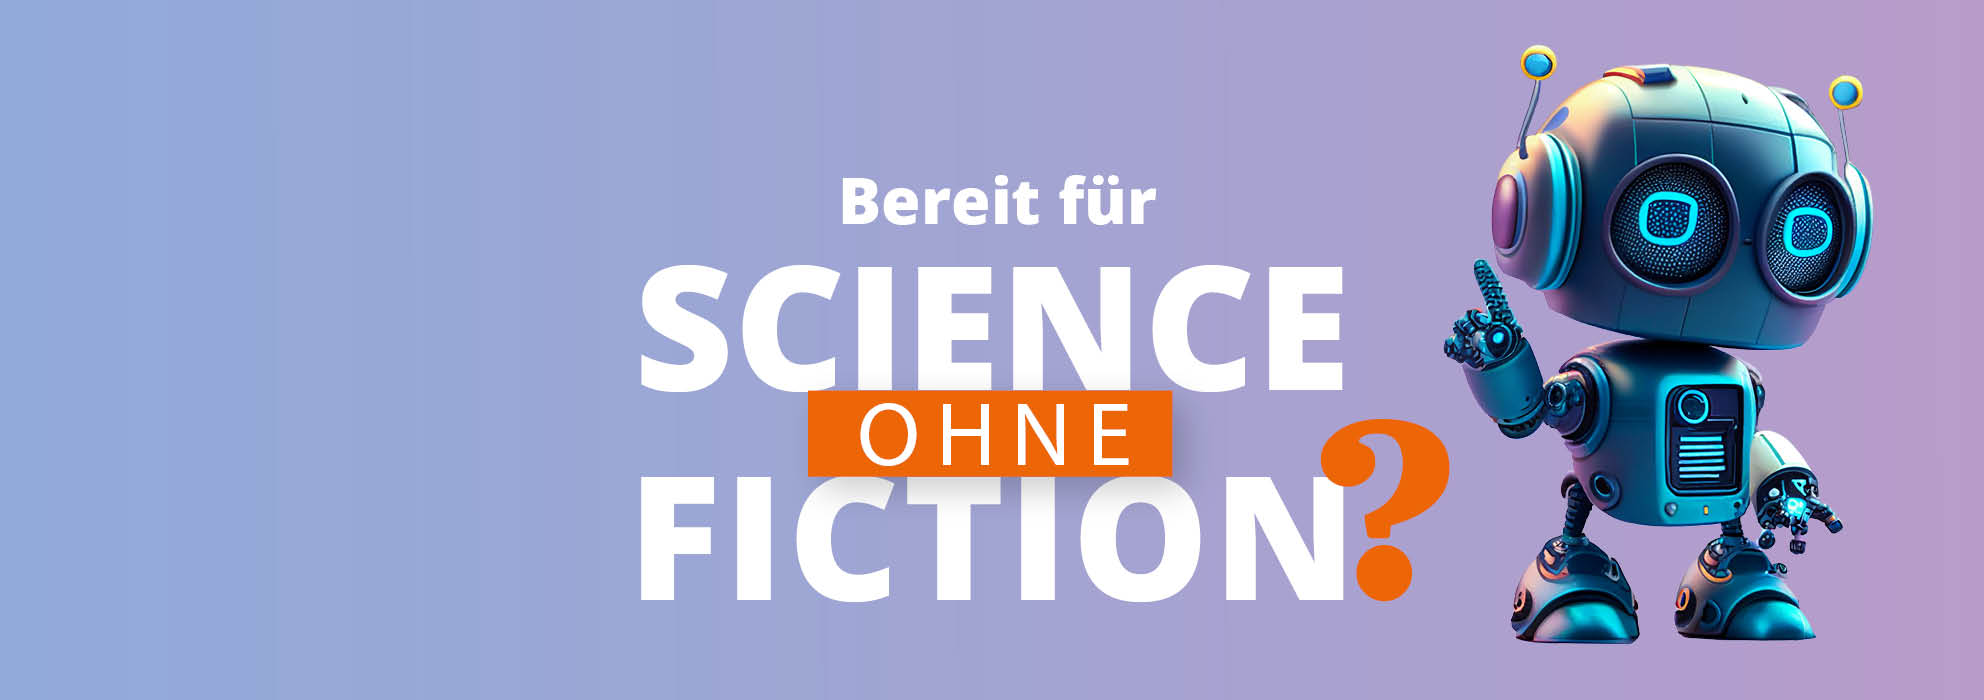 Roboter Science ohne Fiction